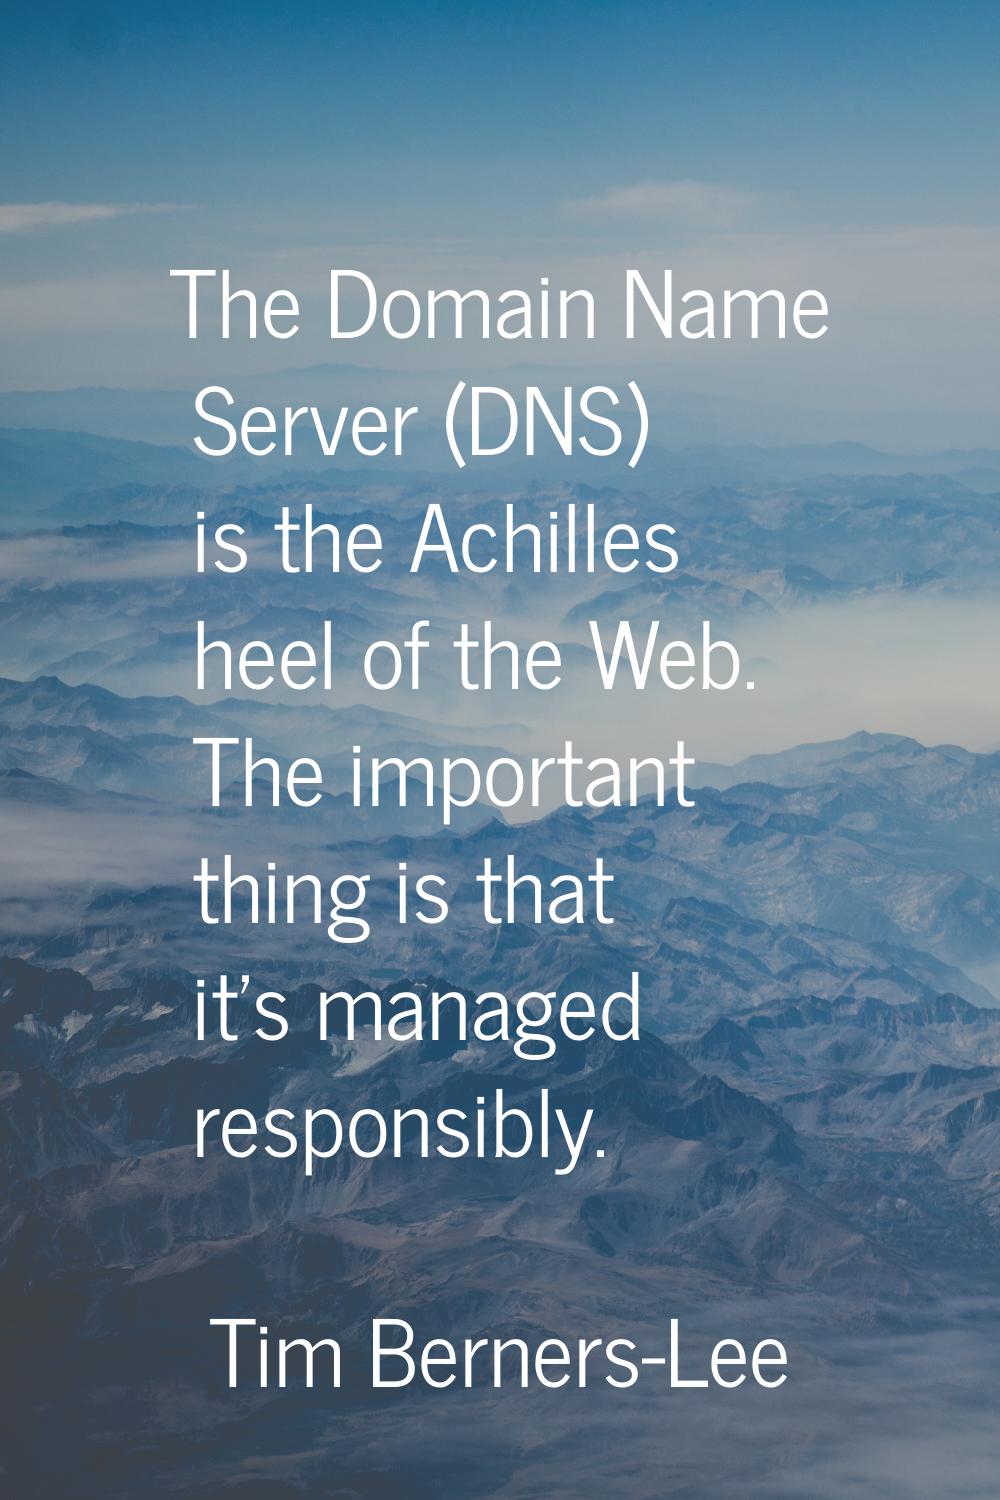 The Domain Name Server (DNS) is the Achilles heel of the Web. The important thing is that it's mana